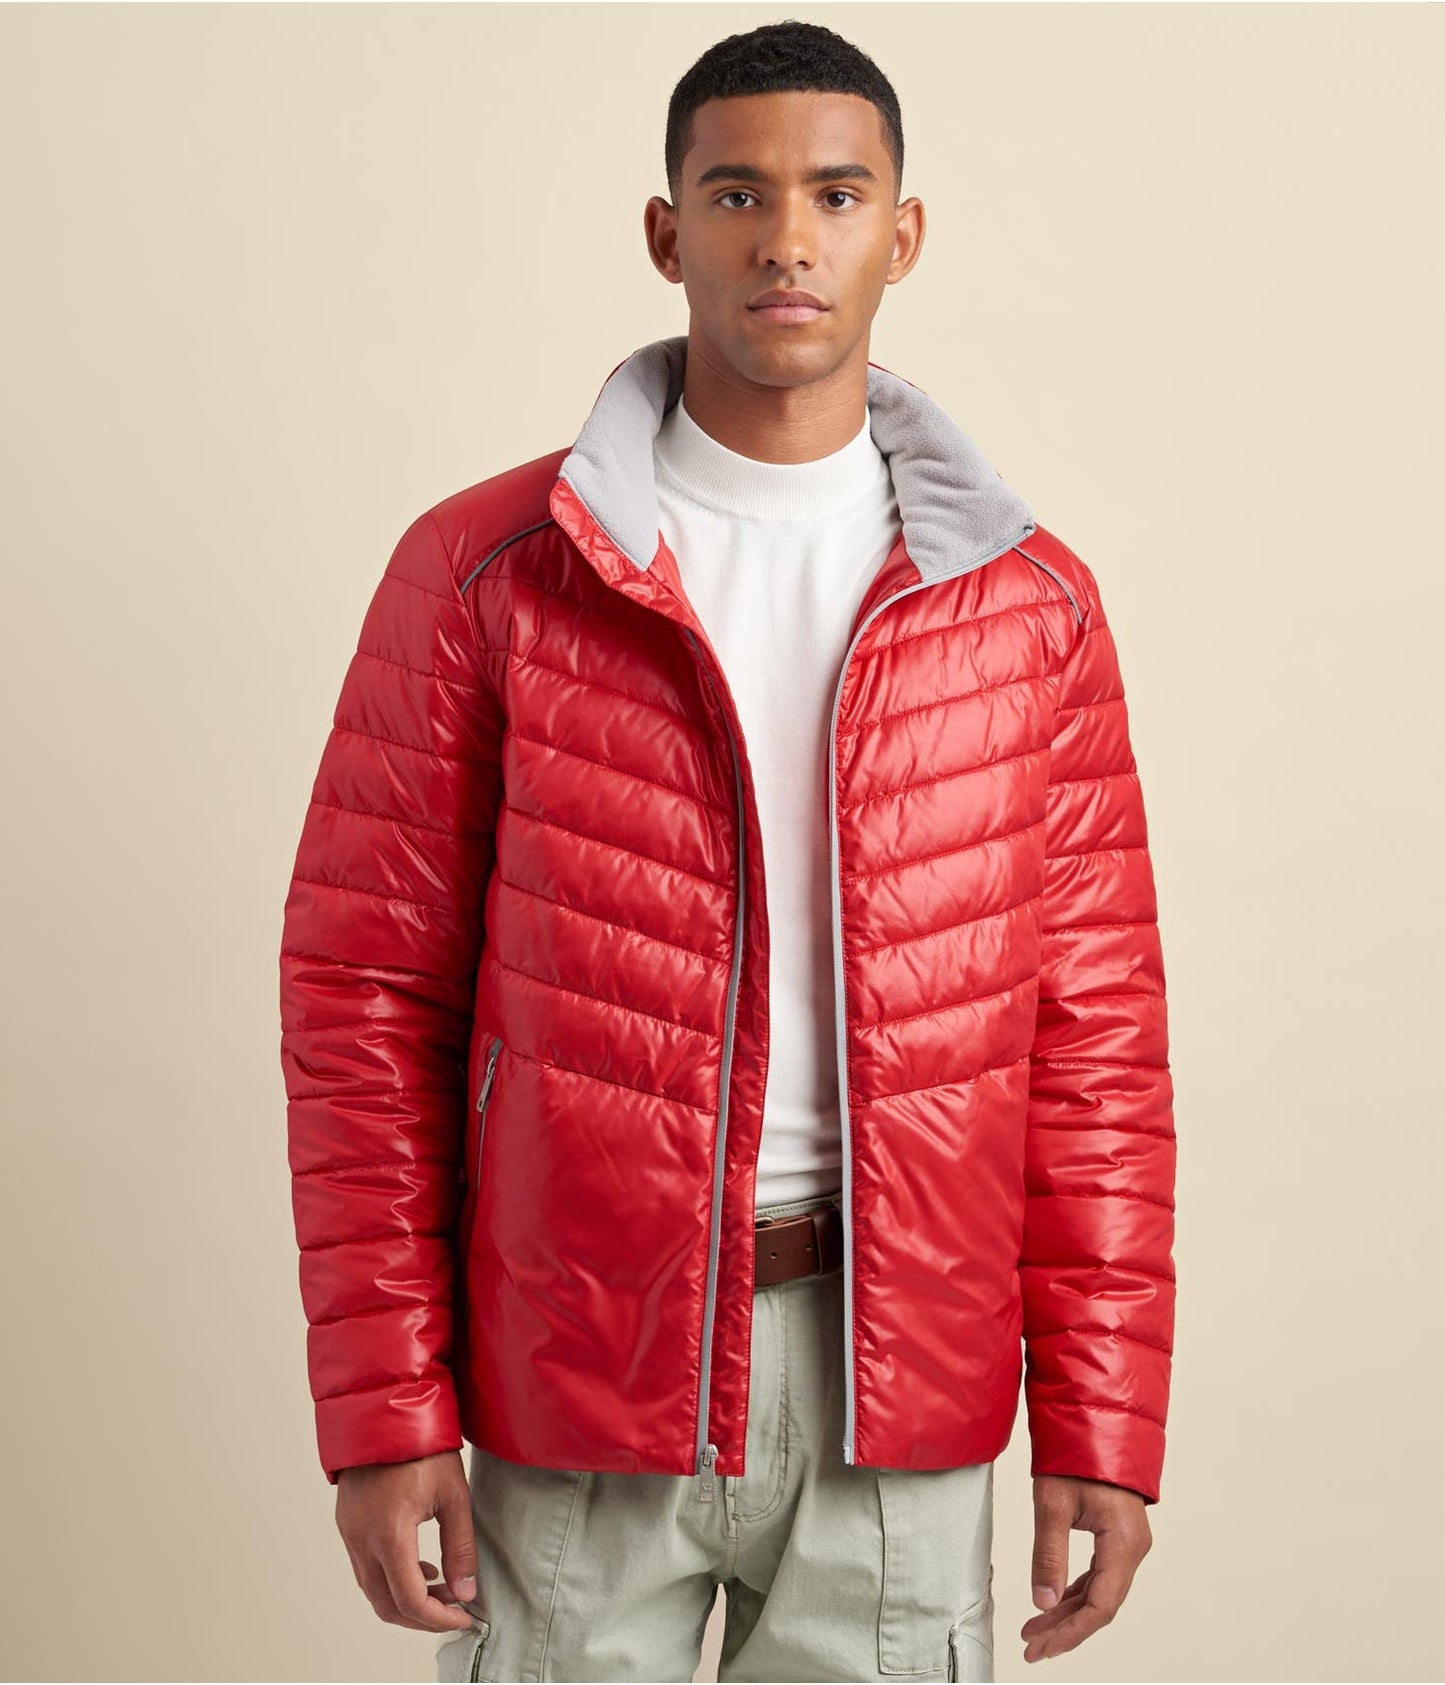 Men's Puffer Leather Jacket In Red With Removable Hood